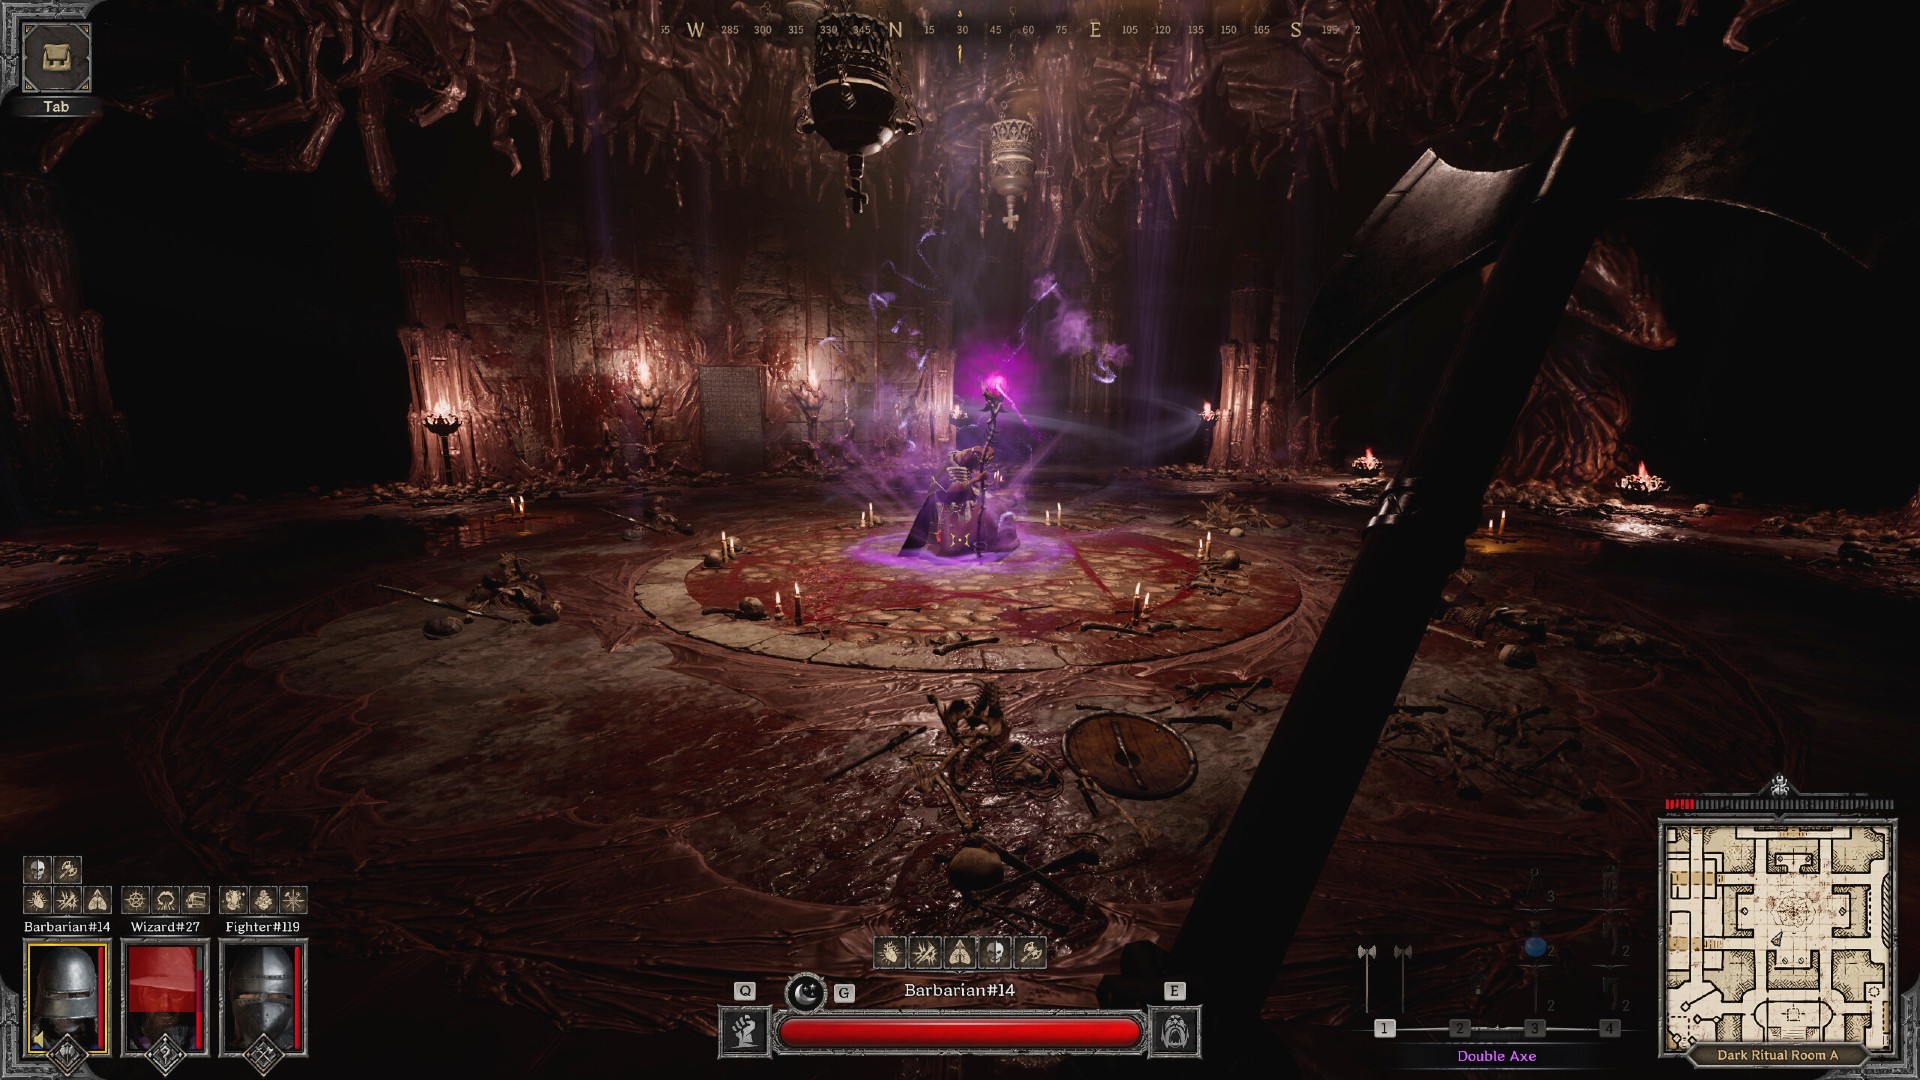 A magical enemy rises in a chamber in one of the dungeons in Dark and Darker, one of the best free PC games.